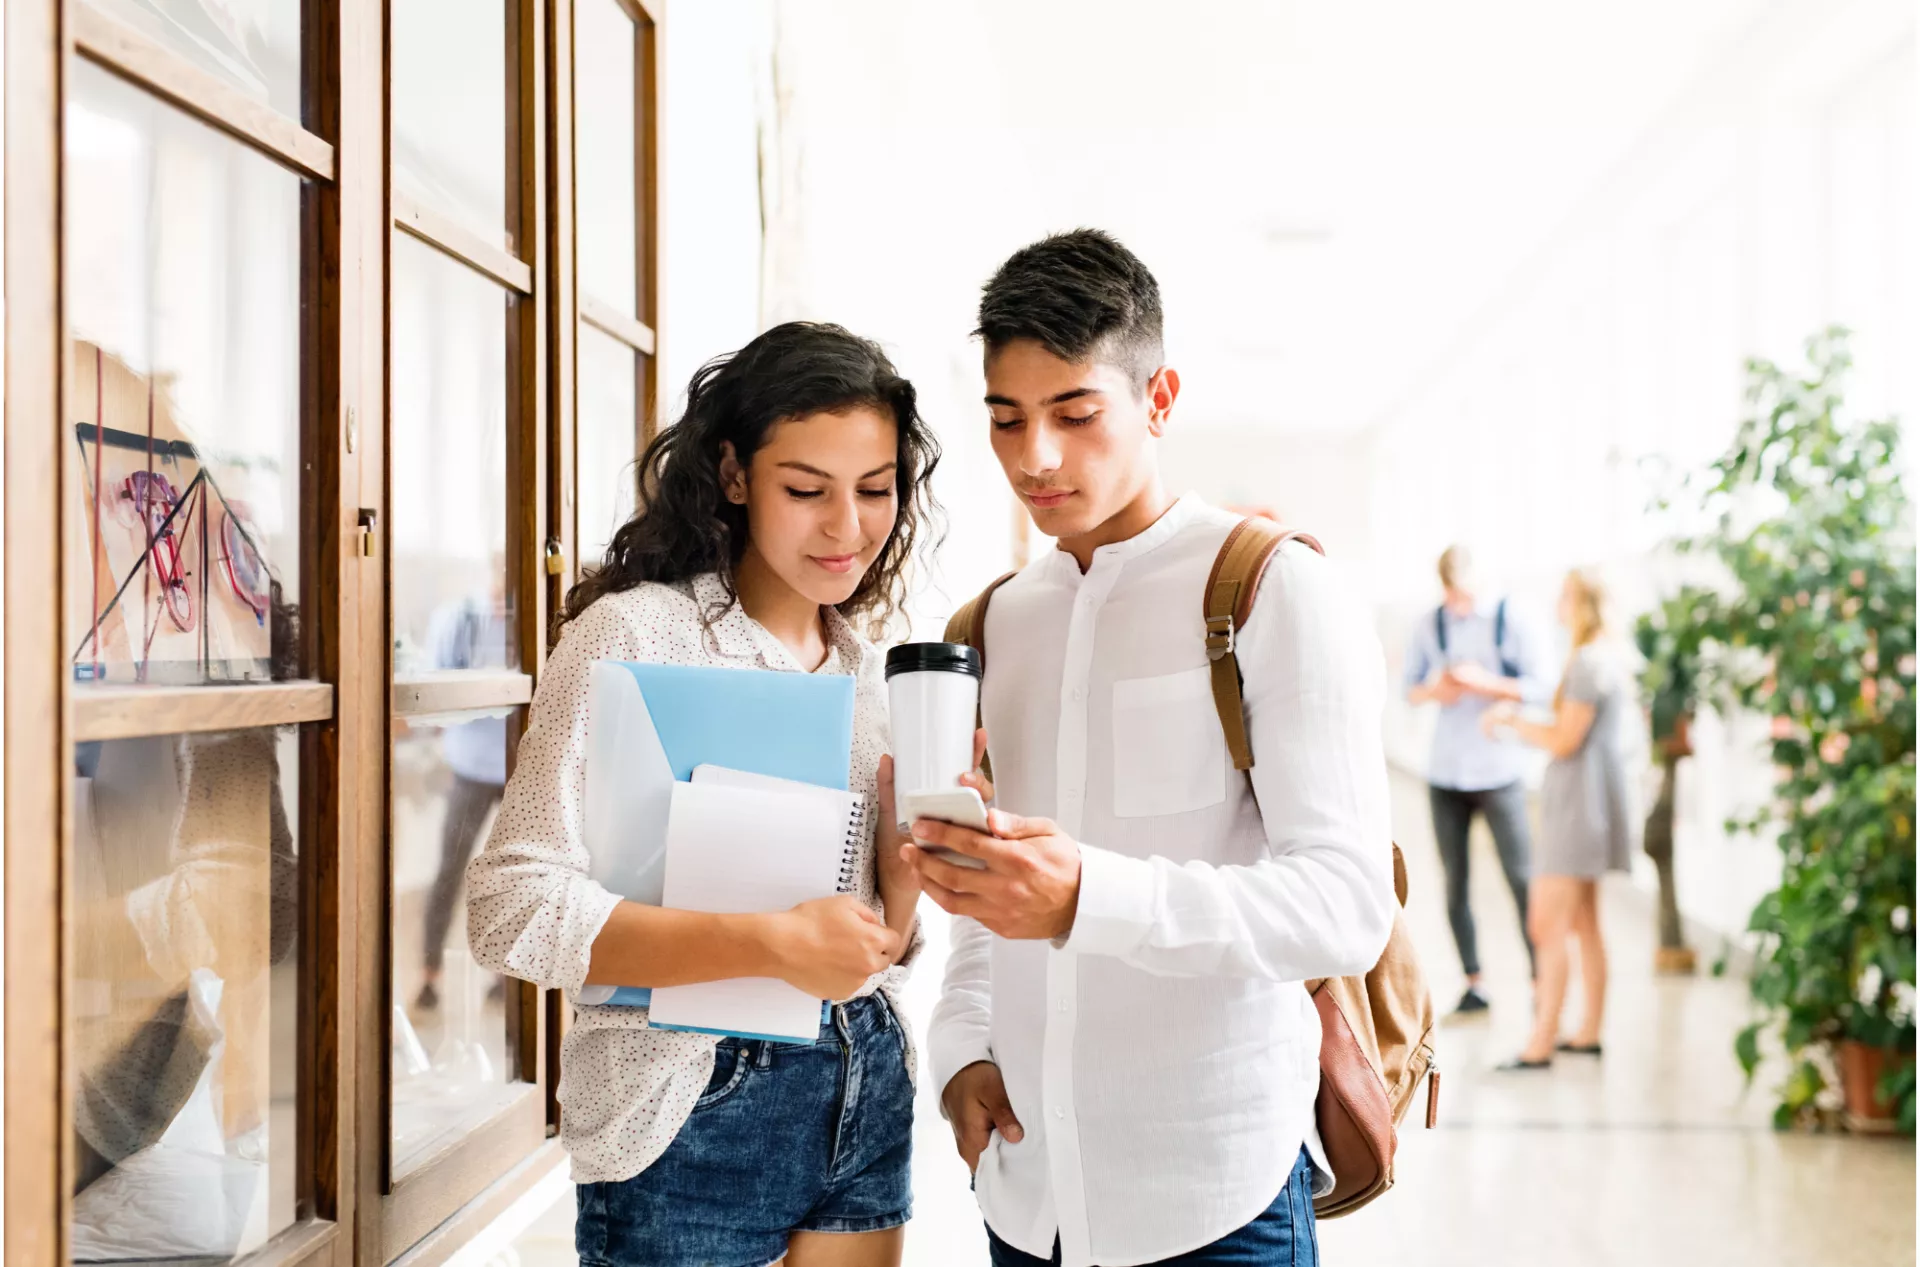 Two coming-of-age Latino students in a school setting looking at their phone. 